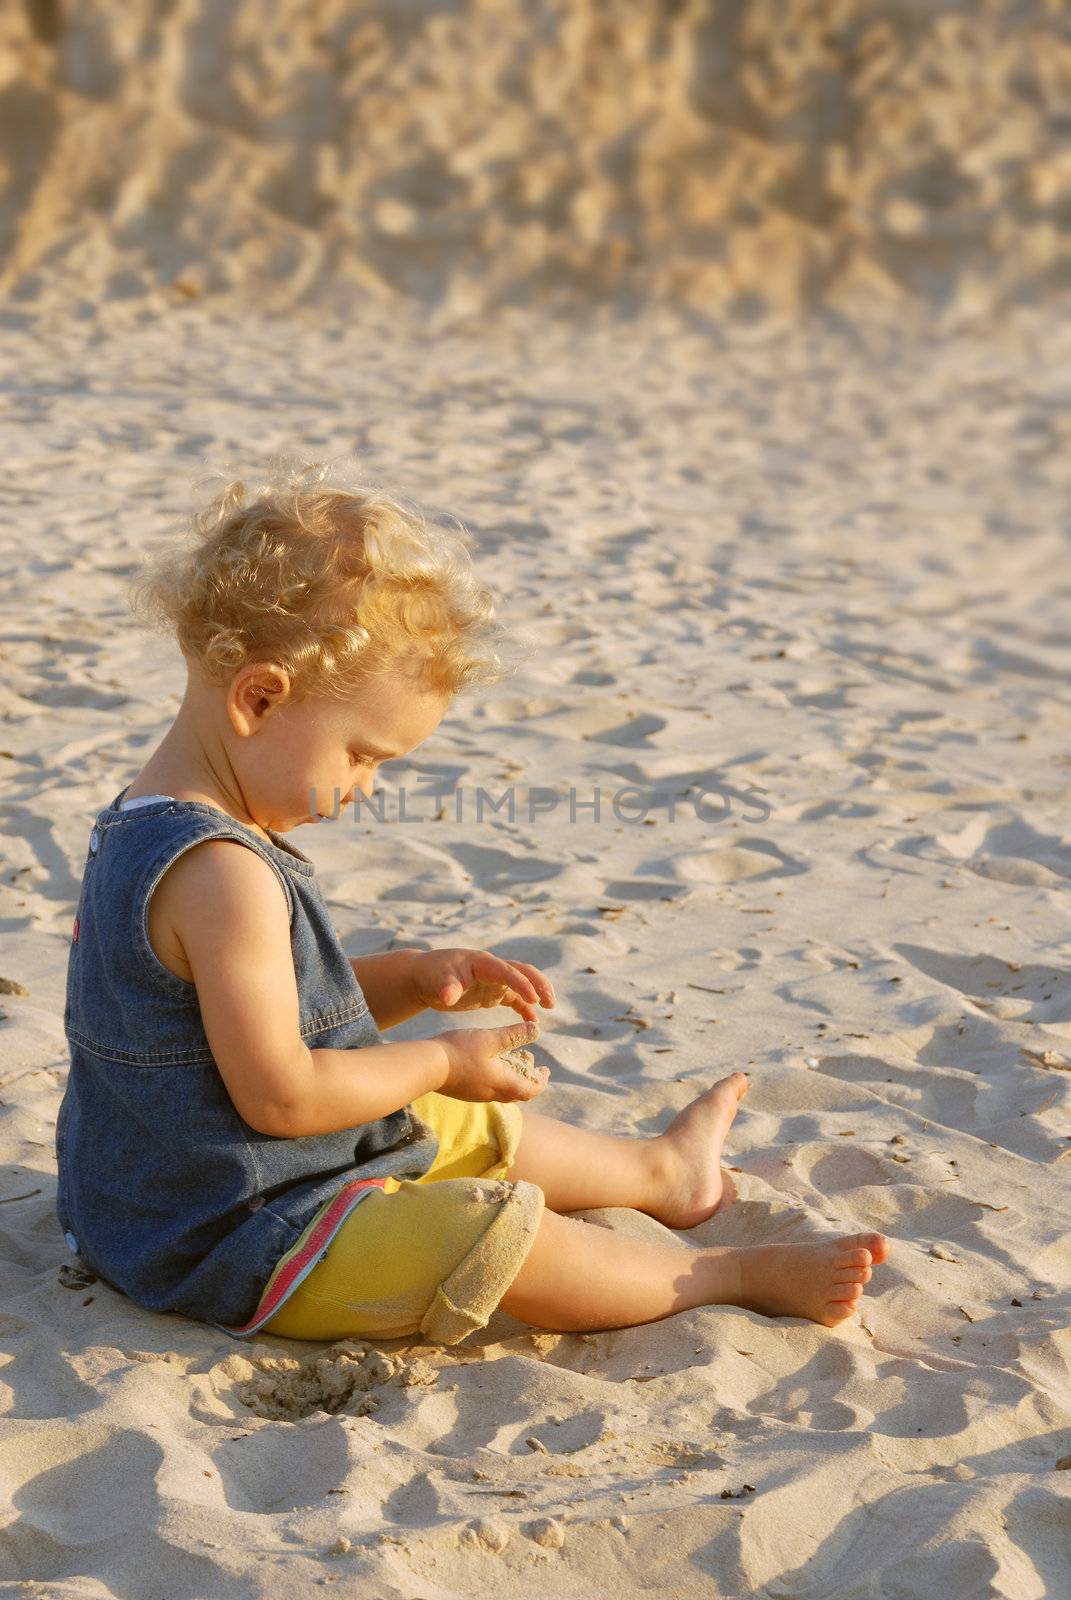 Little girl playing on the beach with sand. A boy in his back out of focus in the background.